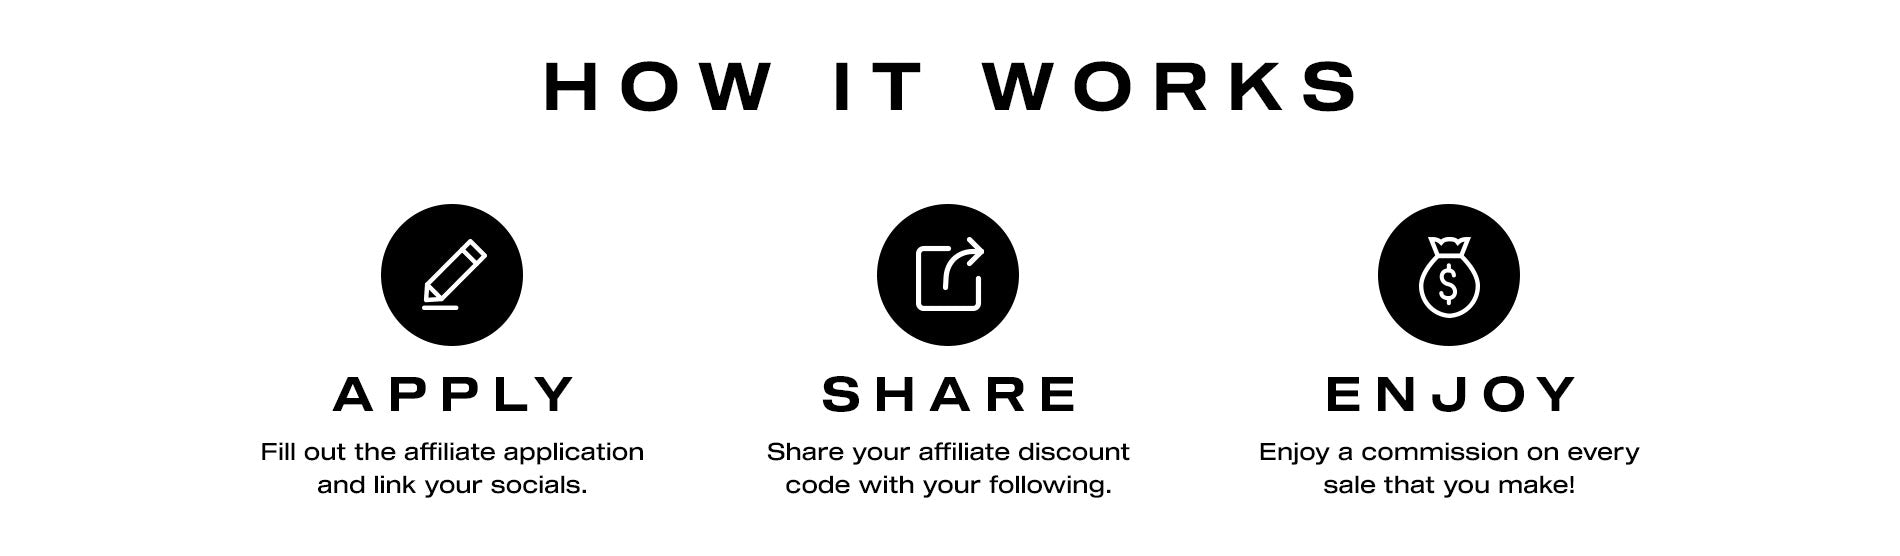 How It Works: Apply, Share, Enjoy!